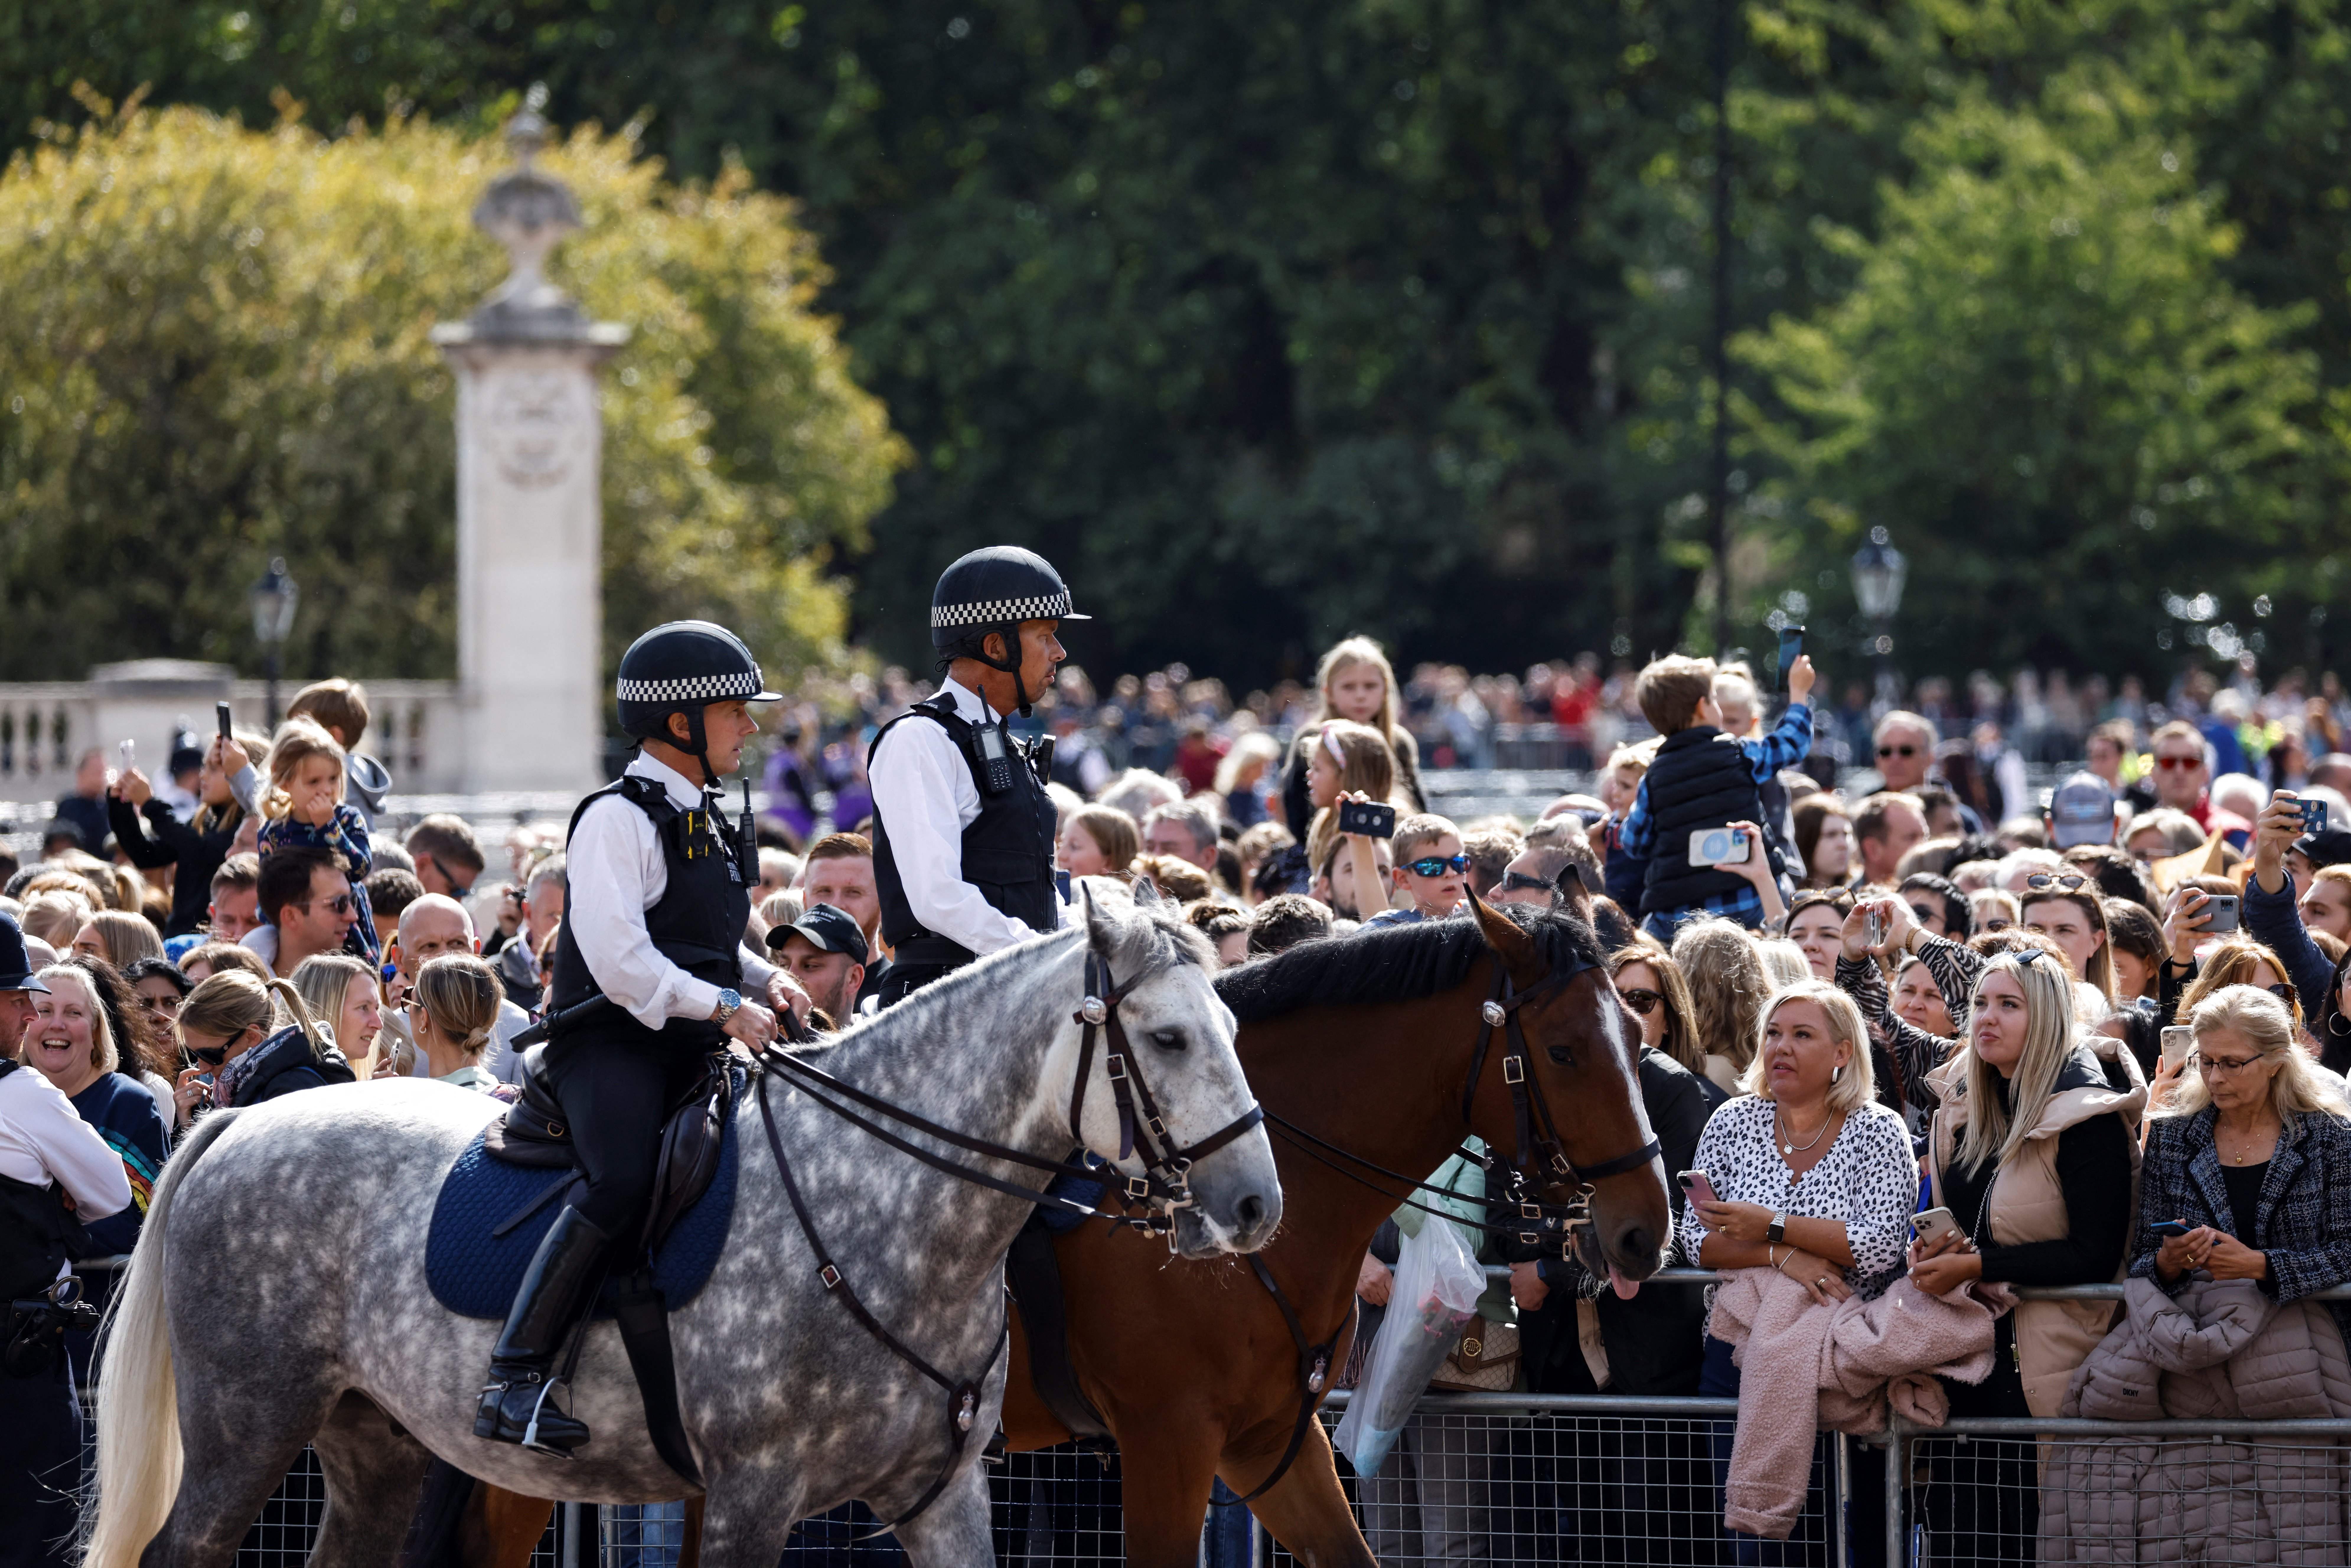 Police officers patrol on their horses as members of the public gather outside of Buckingham Palace on Sunday.